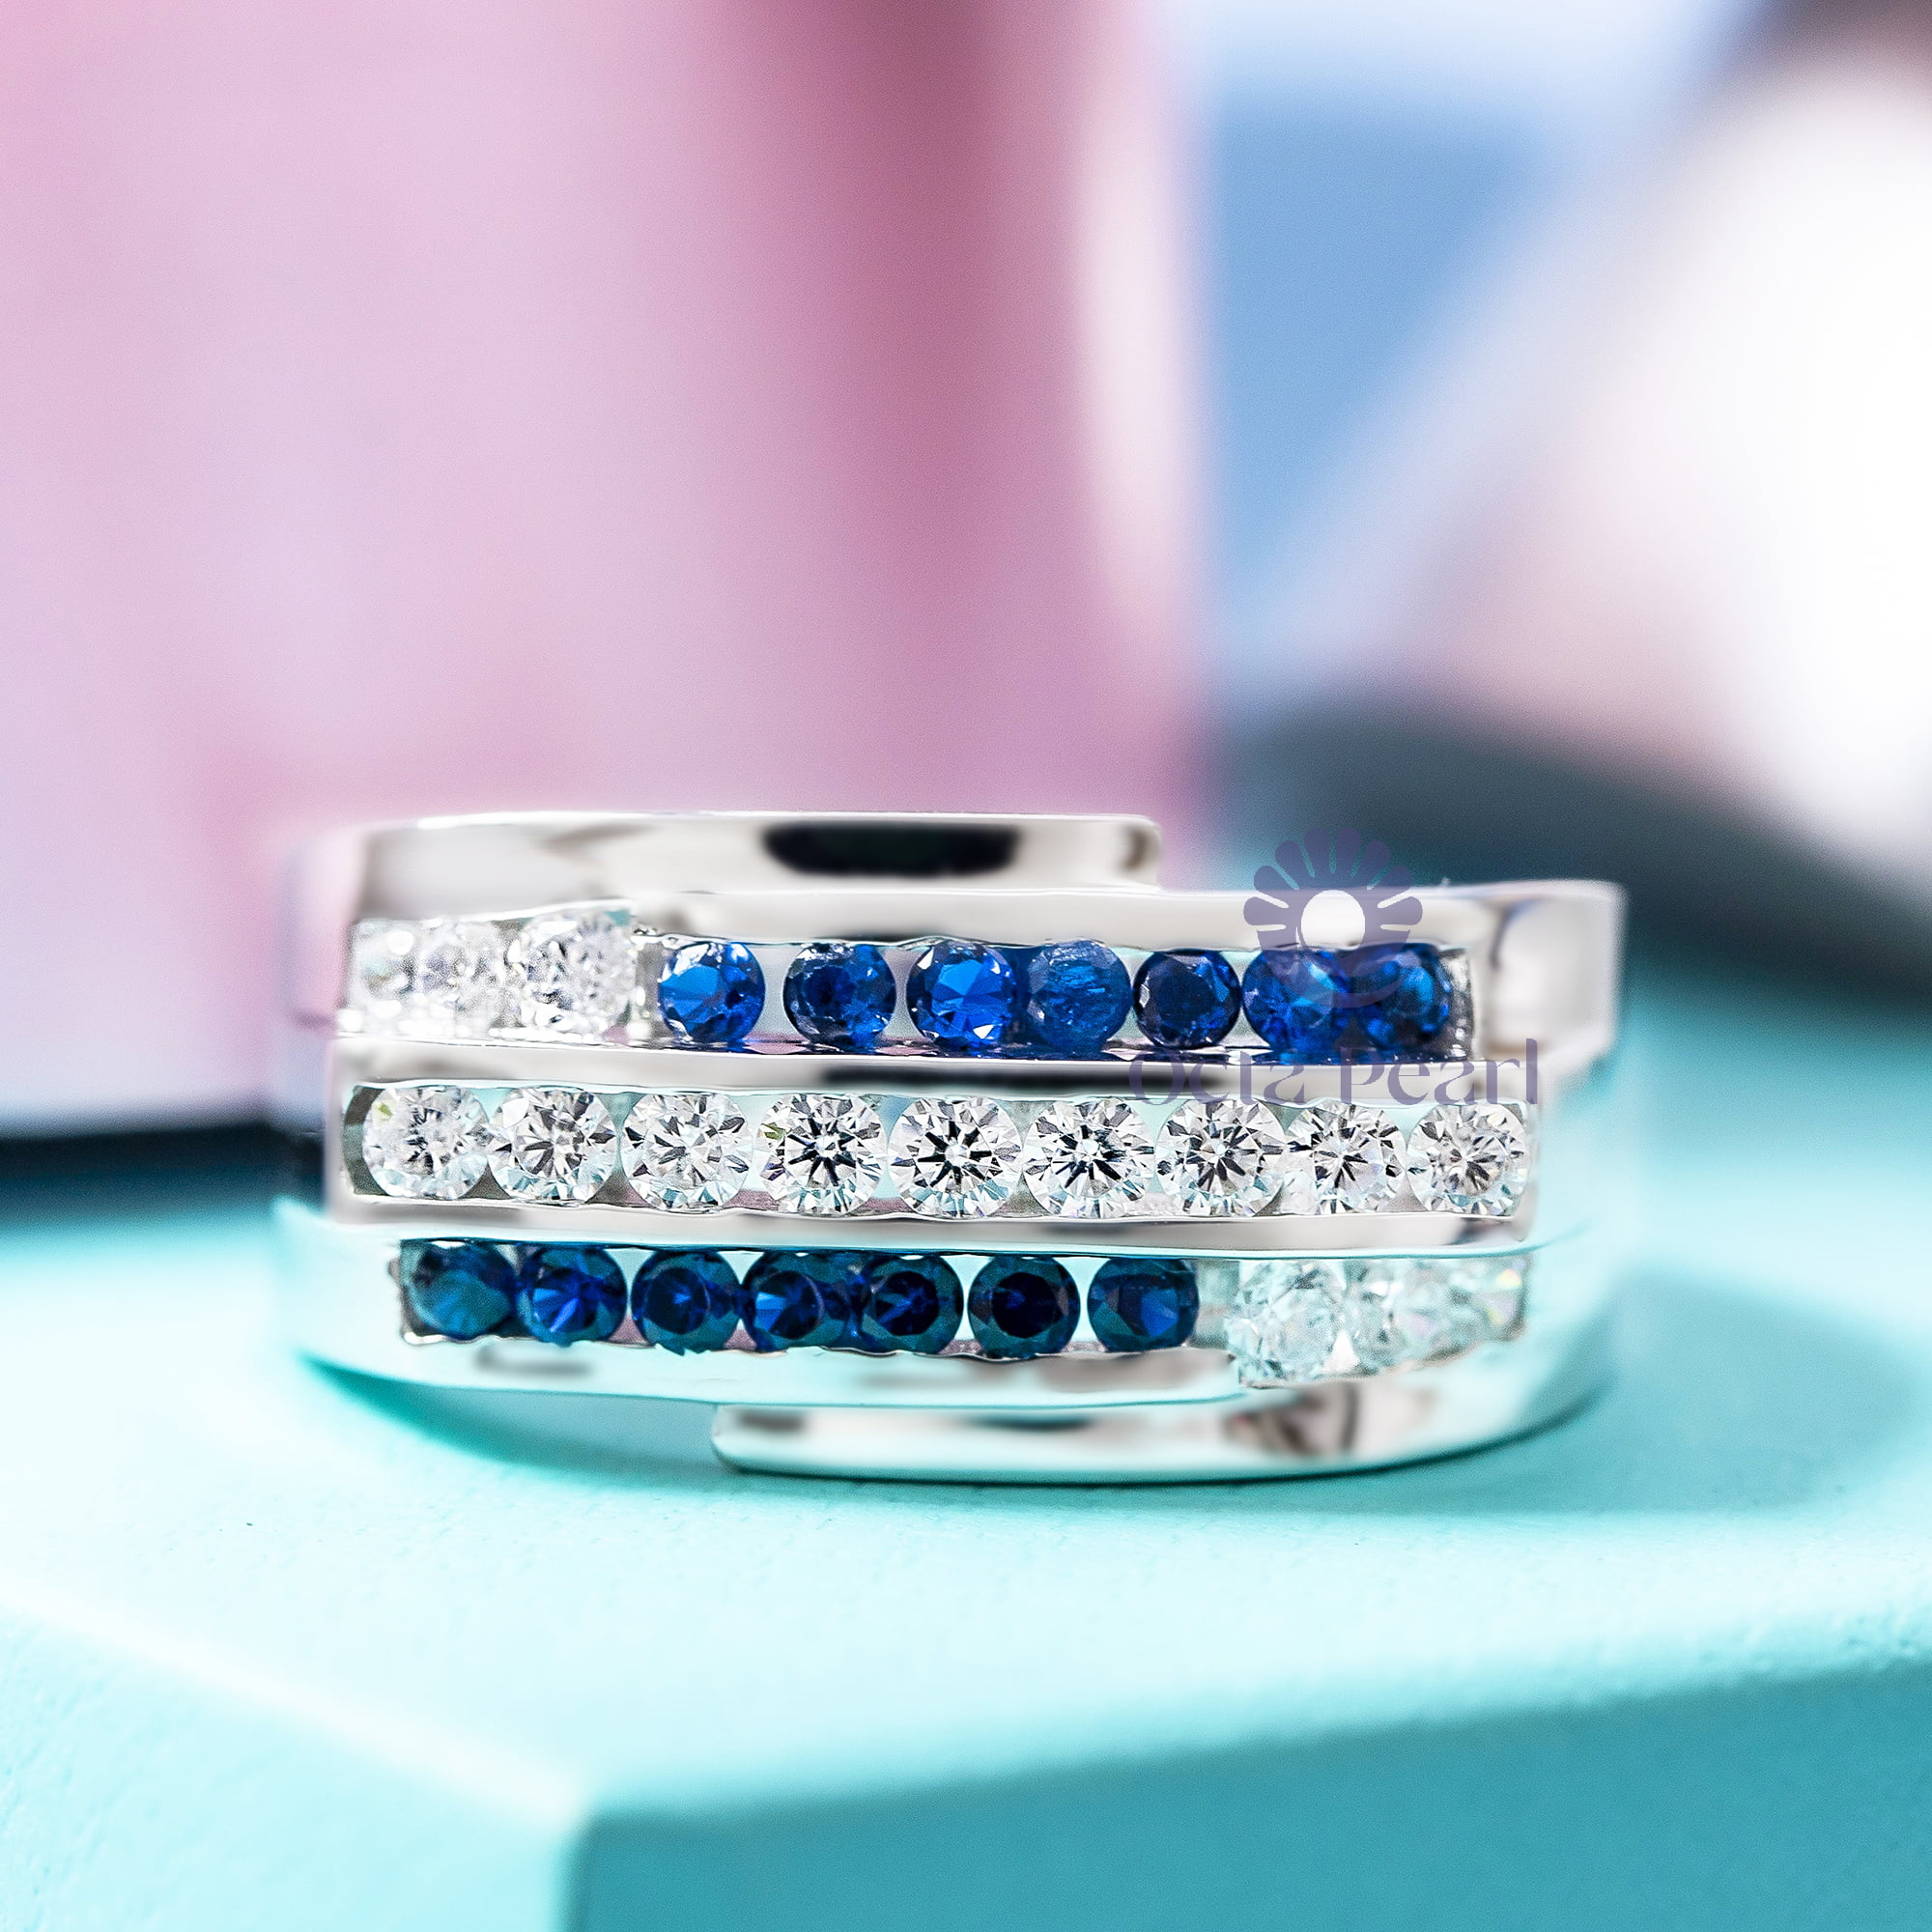 Blue Sapphire & White Round CZ Stone Channel Setting Men's Ring For Wedding-Proposal ( 1 1/6 TCW)